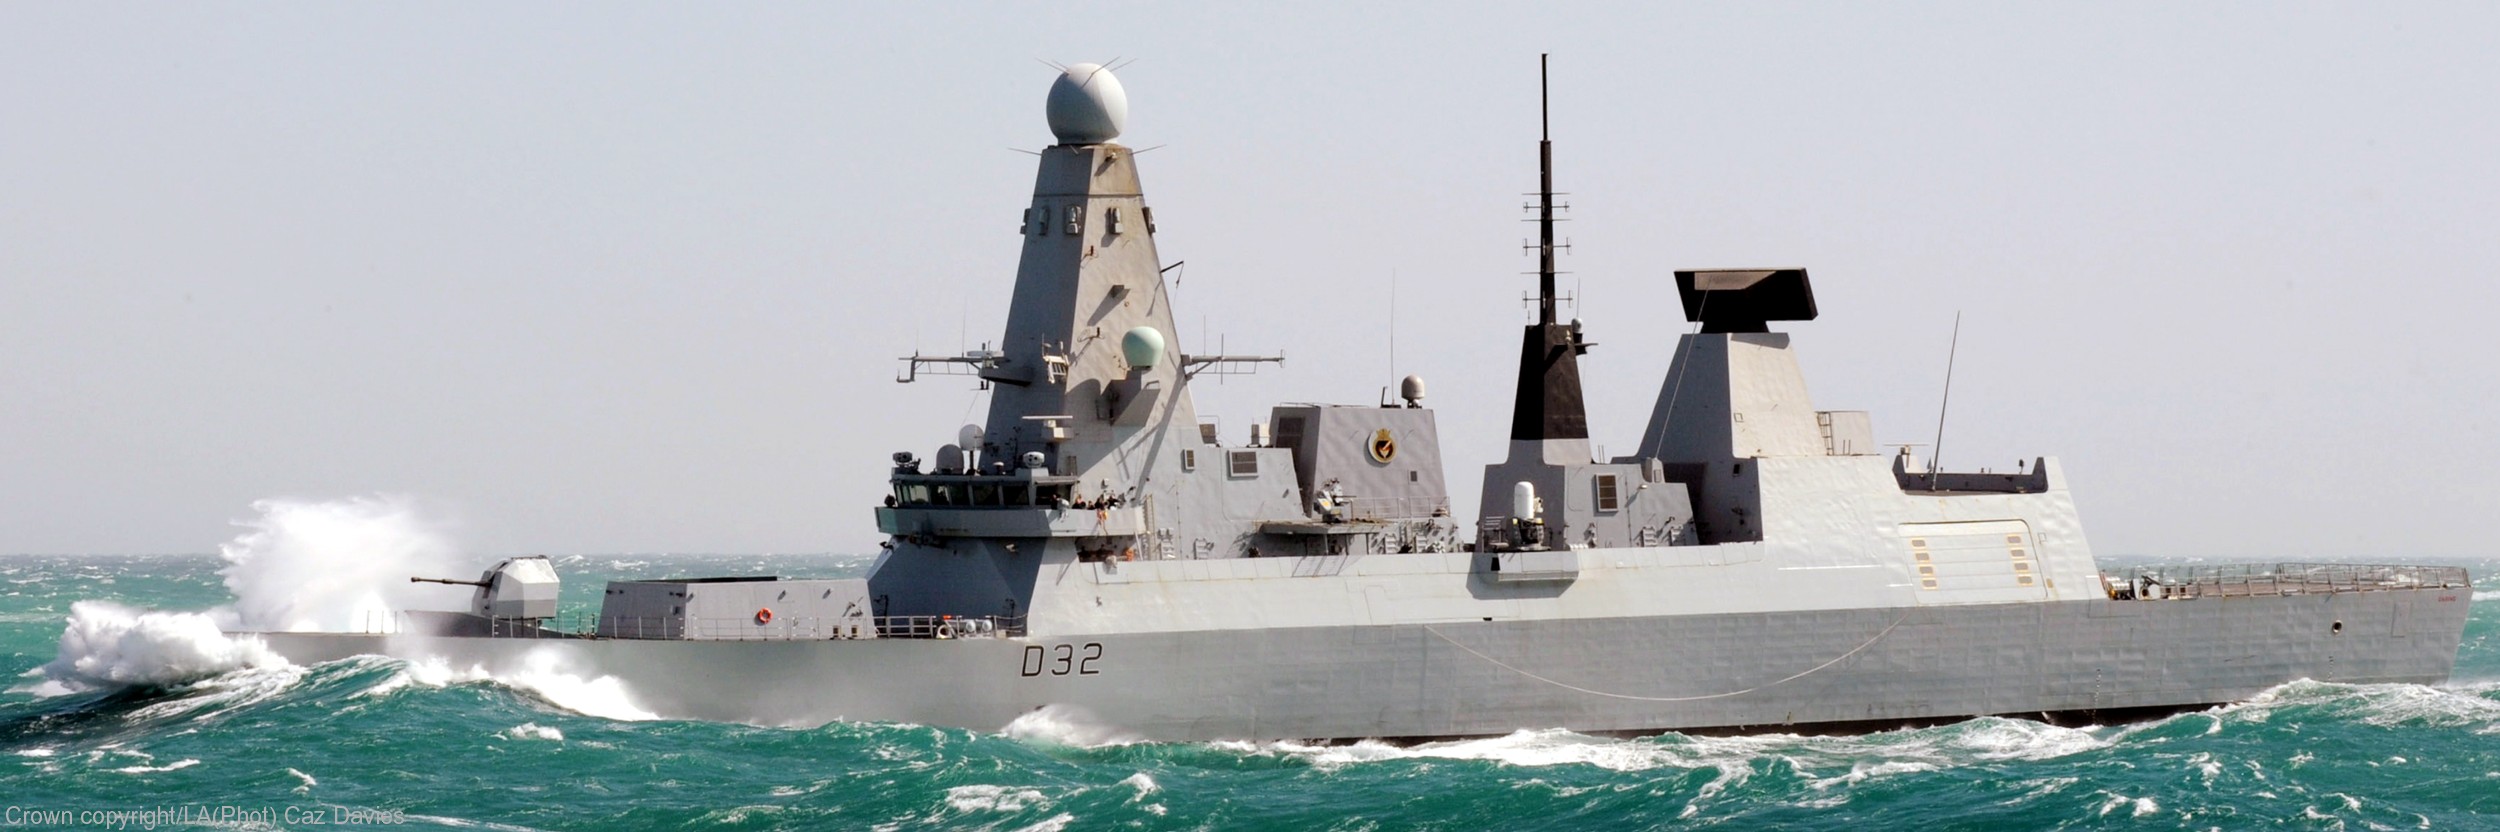 hms daring d-32 type 45 class guided missile destroyer royal navy sea viper paams 22